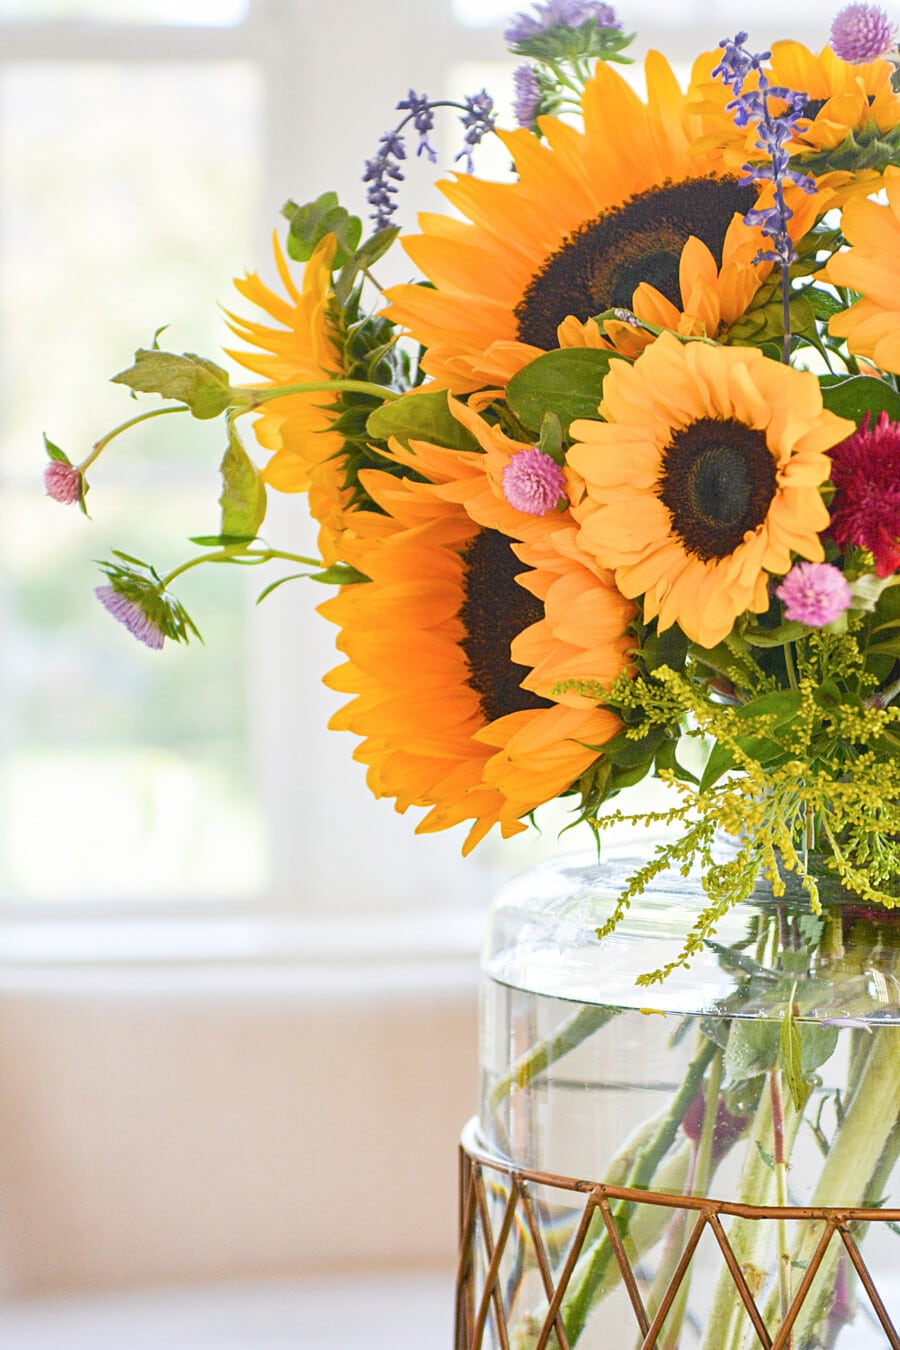 how long do sunflowers last in a vase